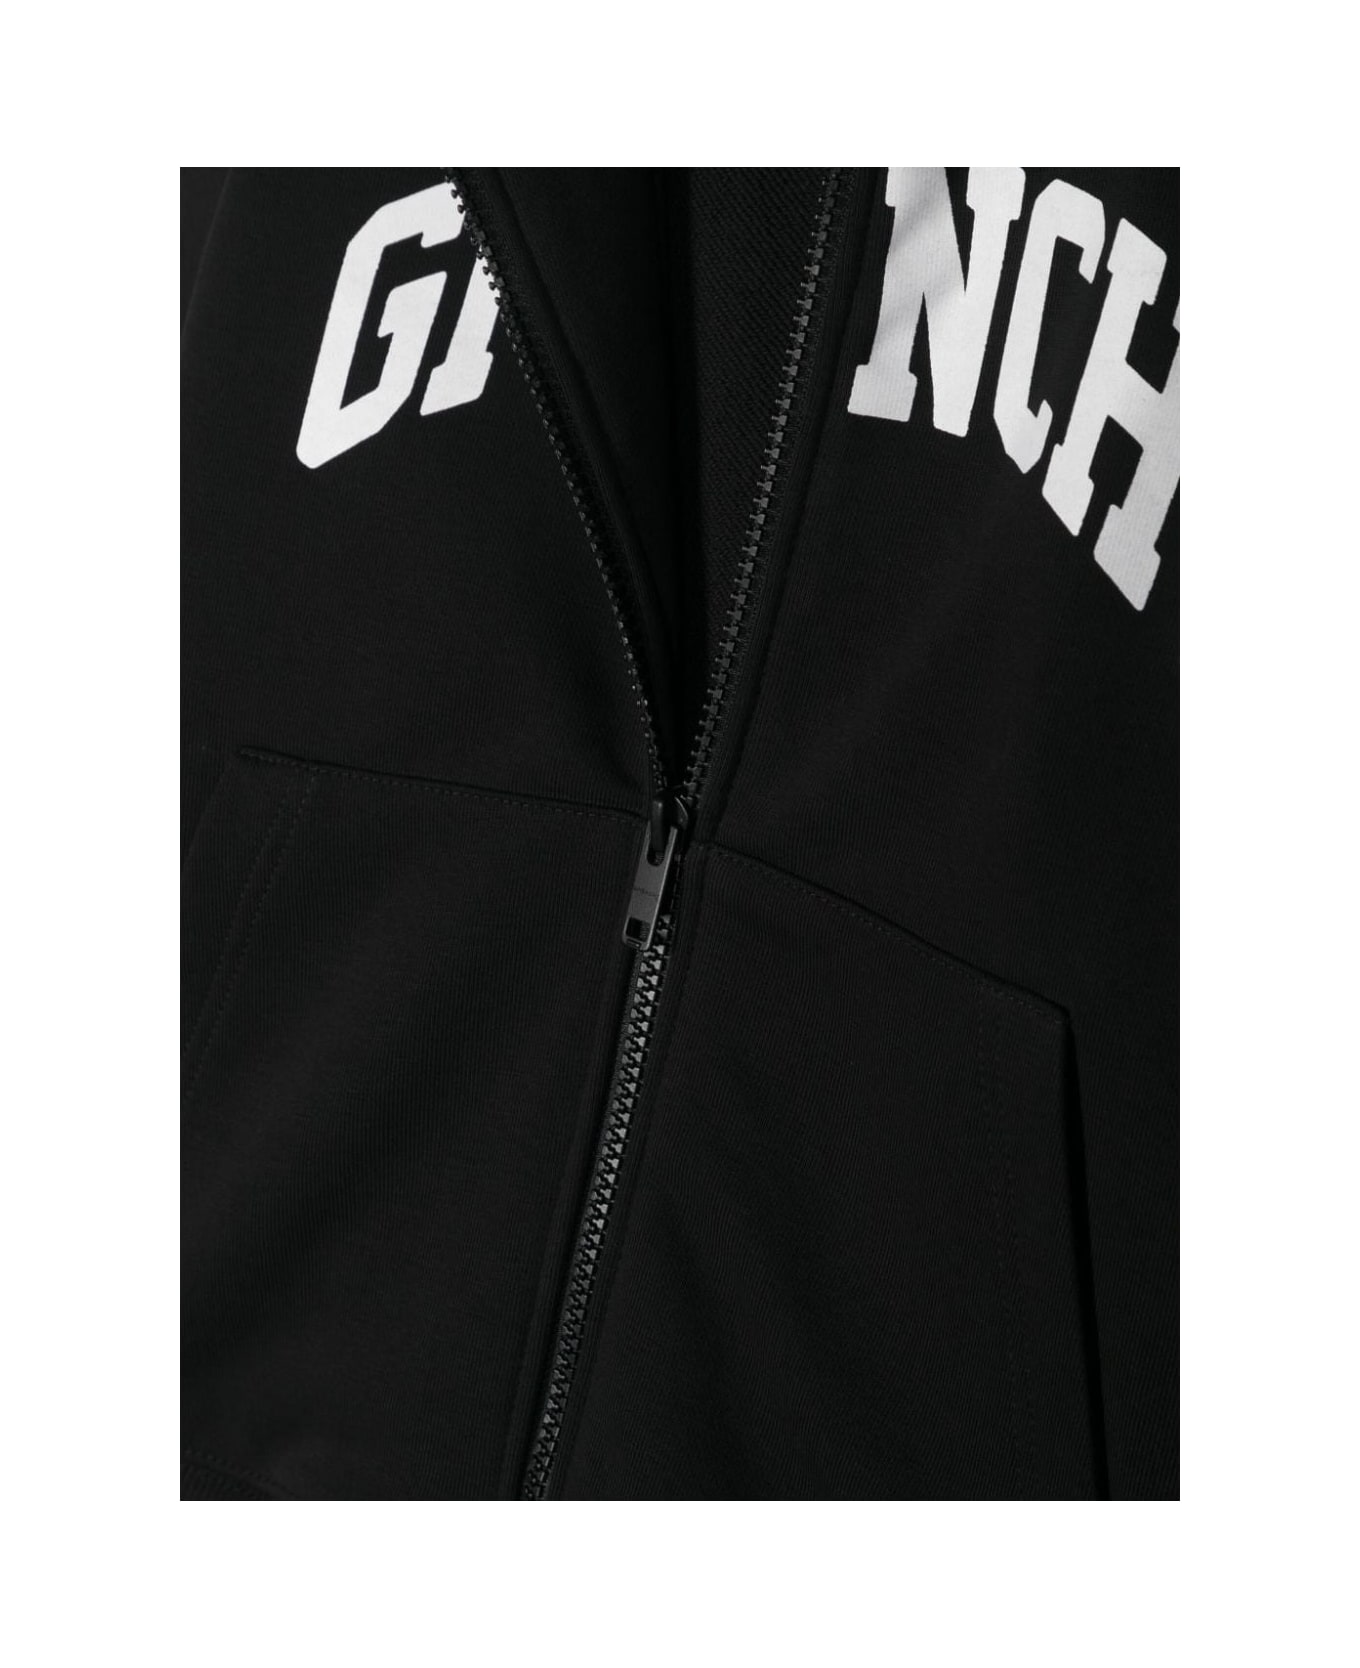 Givenchy Black Givenchy Zip-up Hoodie - Black